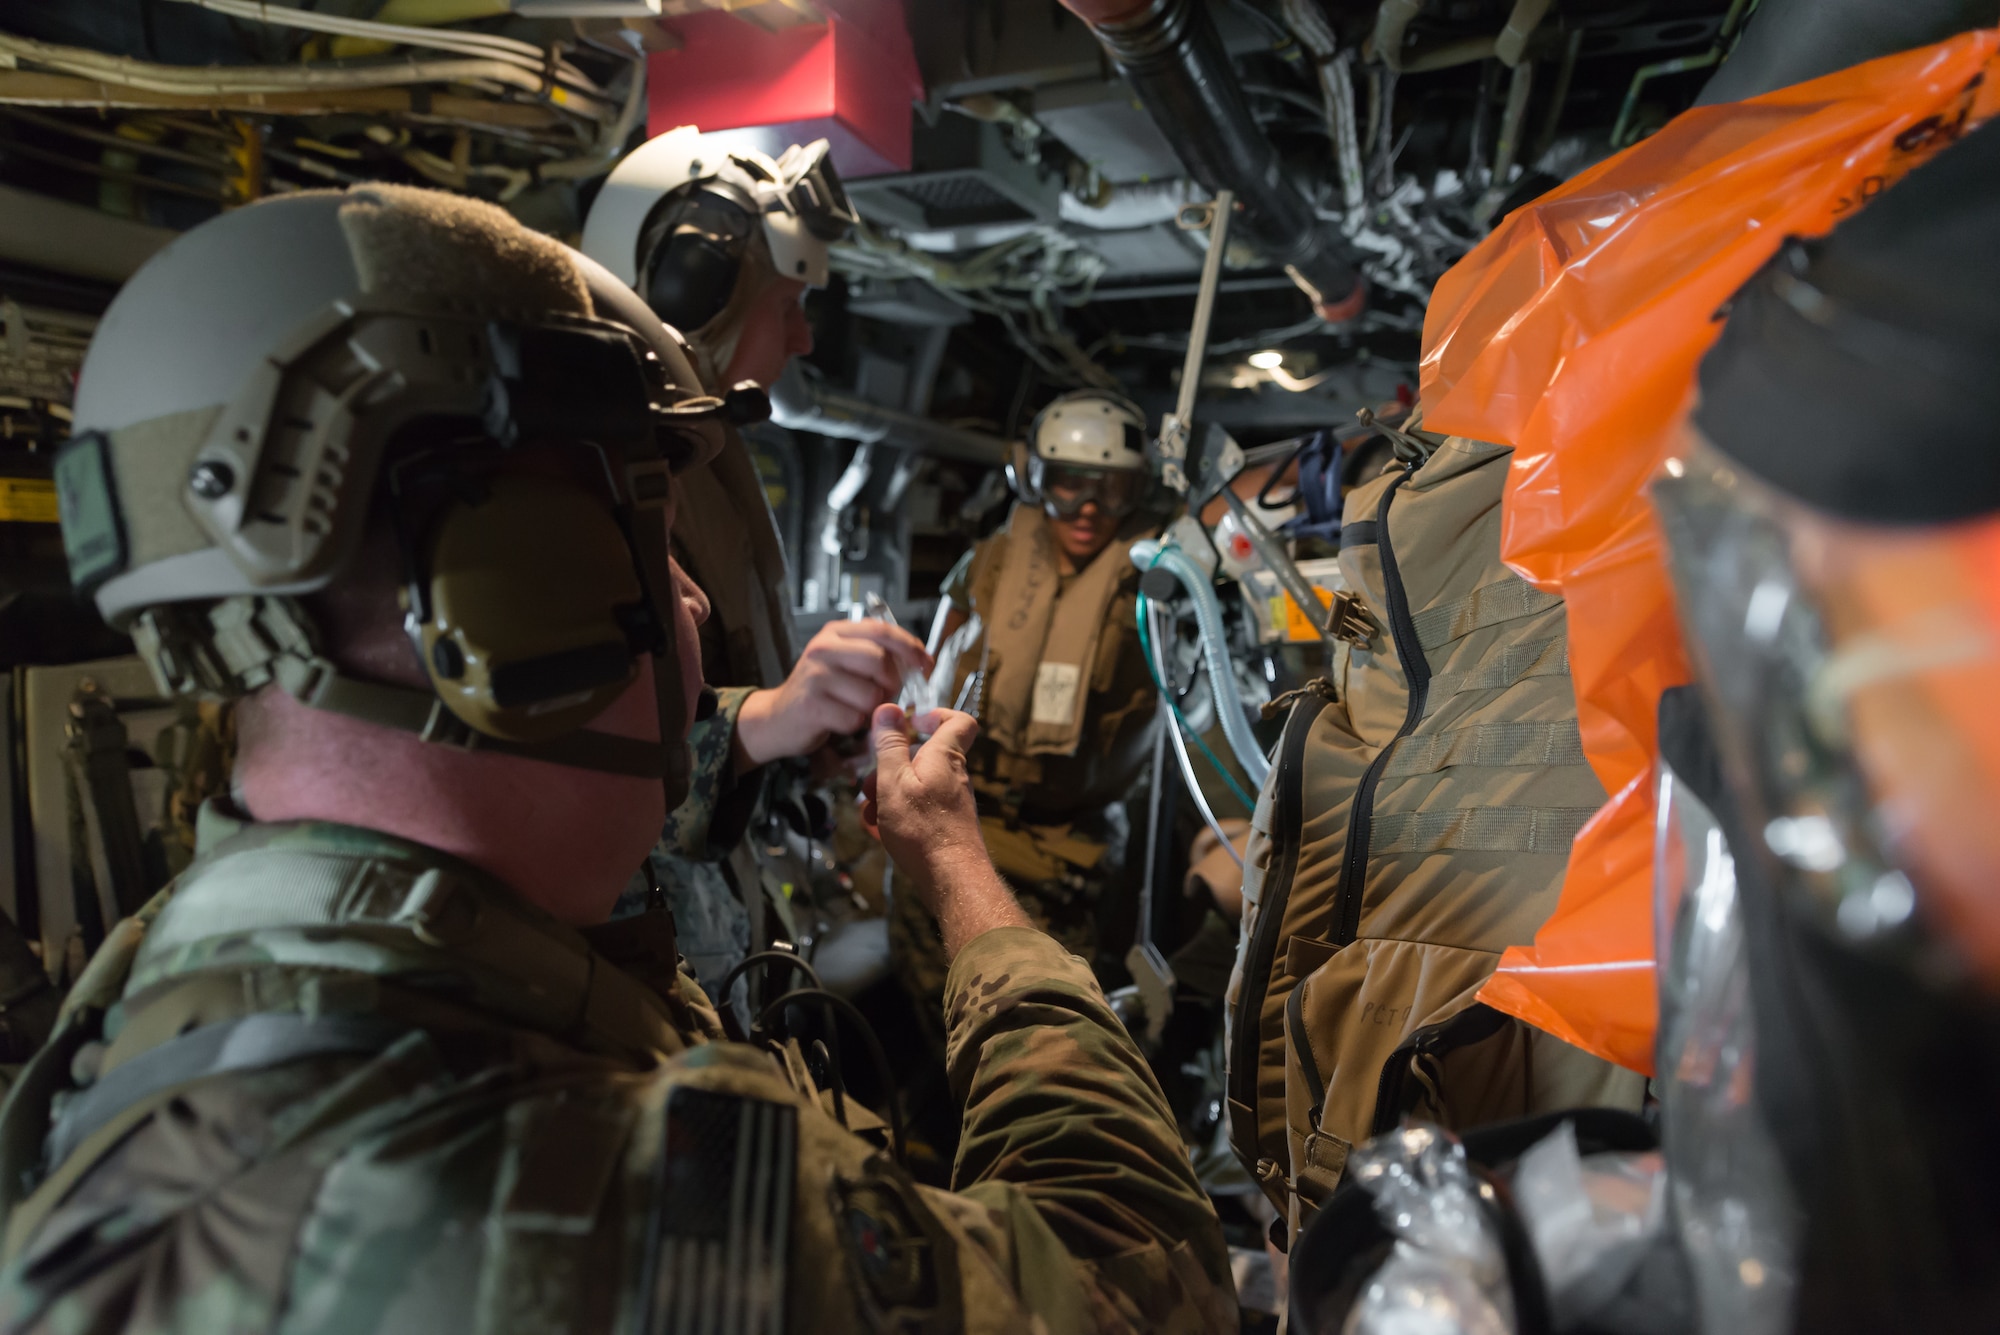 Members of the U.S. Air Force and Navy respond to a simulated casualty during a medical exercise, June 6, 2018, at Camp Hansen, Okinawa, Japan. The Air Force performs joint medical exercises with other U.S. forces regularly in Okinawa to better prepare service members for real world emergencies. (U.S. Air Force photo by Senior Airman Thomas Barley)